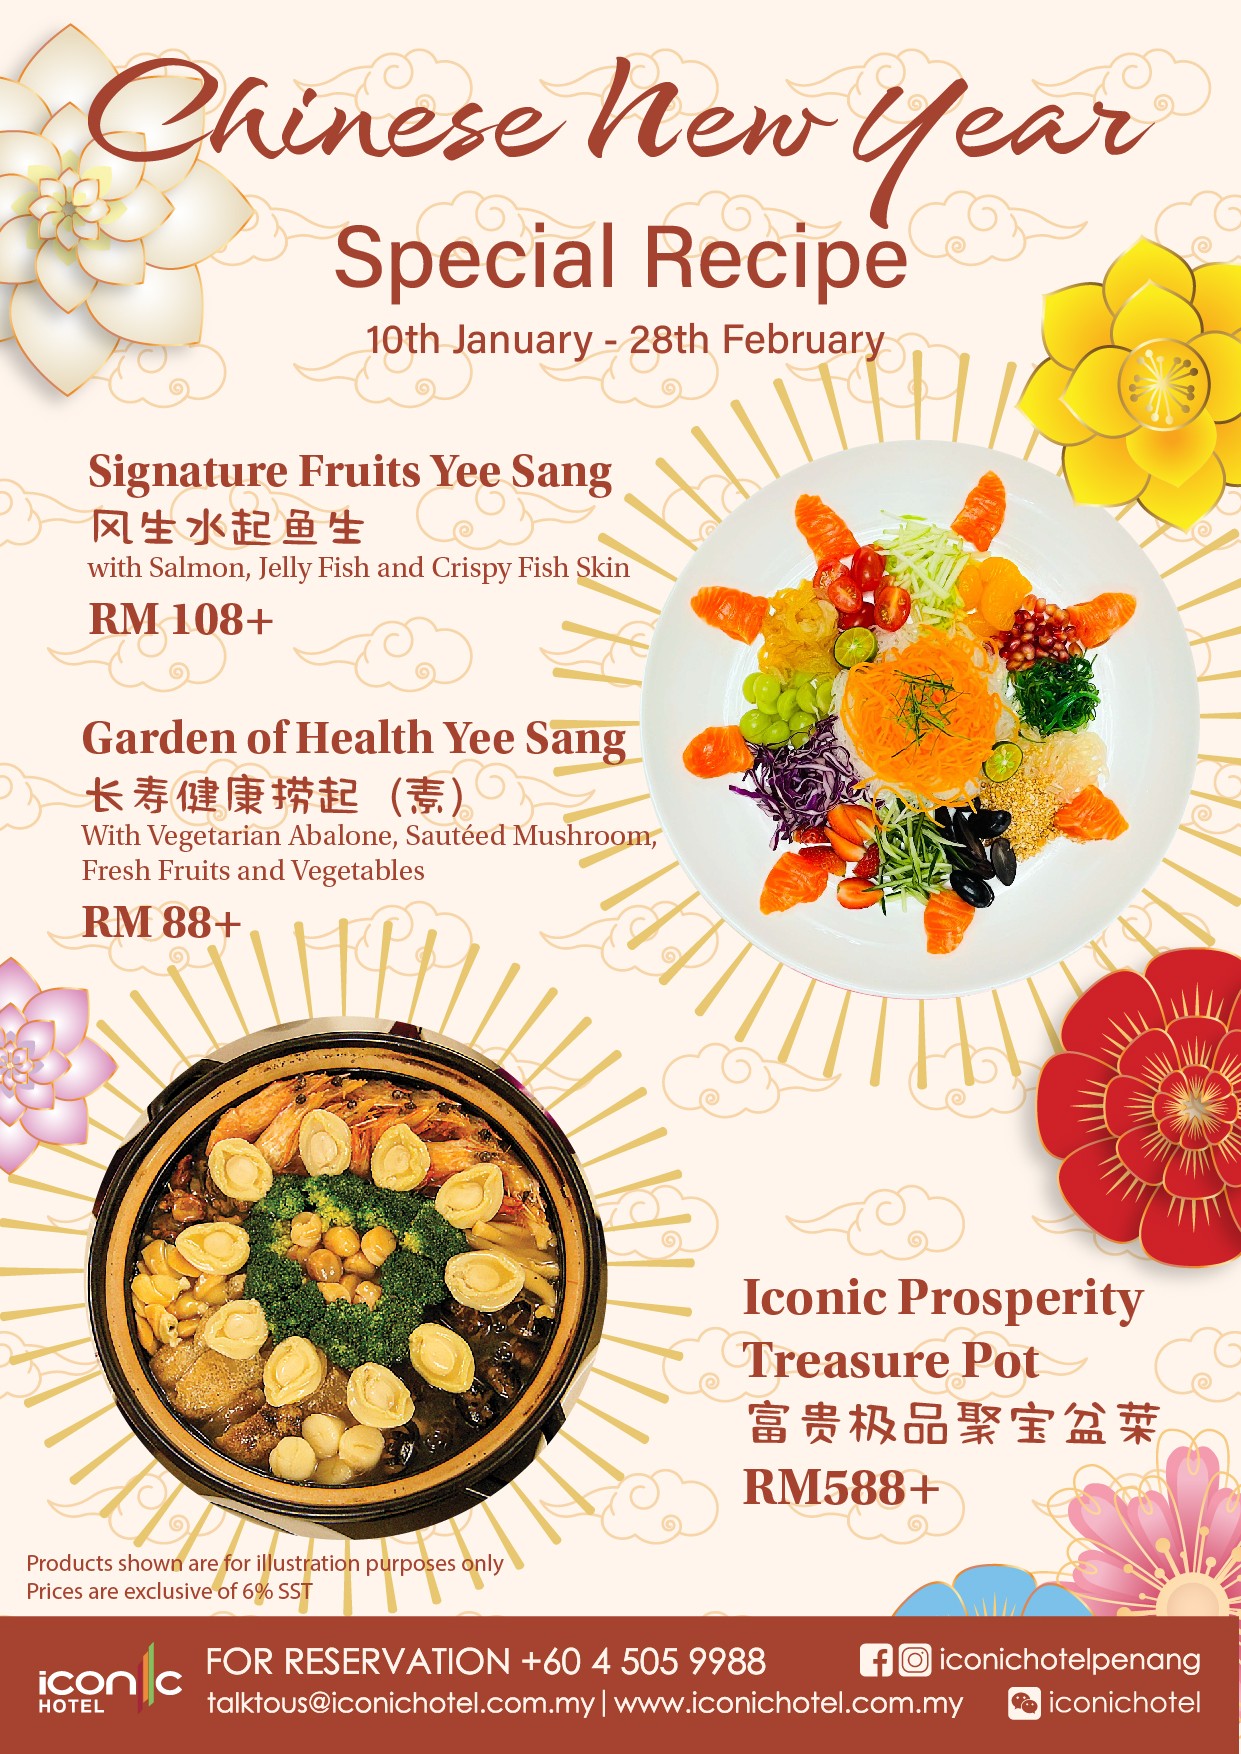 CNY Special Recipe by Iconic Hotel